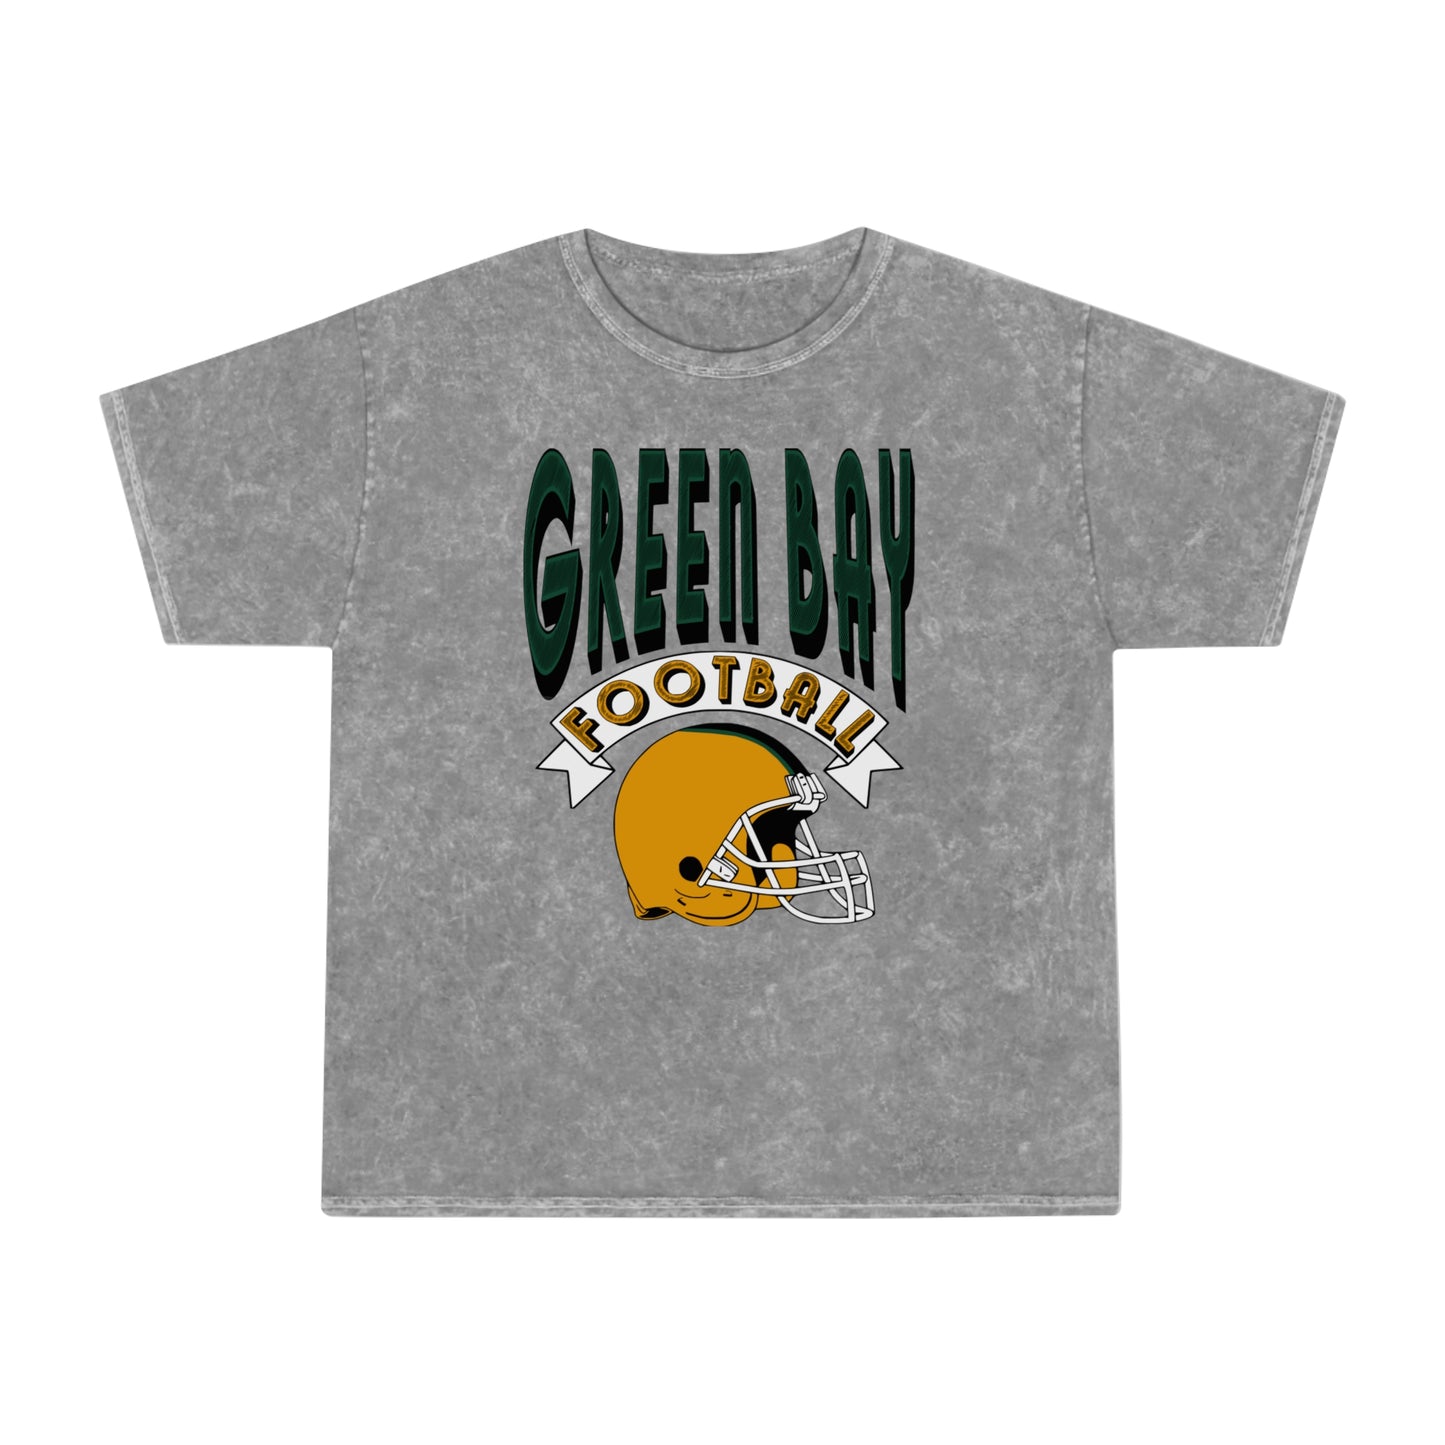 Mineral Wash 90's Green Bay Packers Football Short Sleeve T-Shirt - Vintage Mineral Wash Retro Tee - Design 3